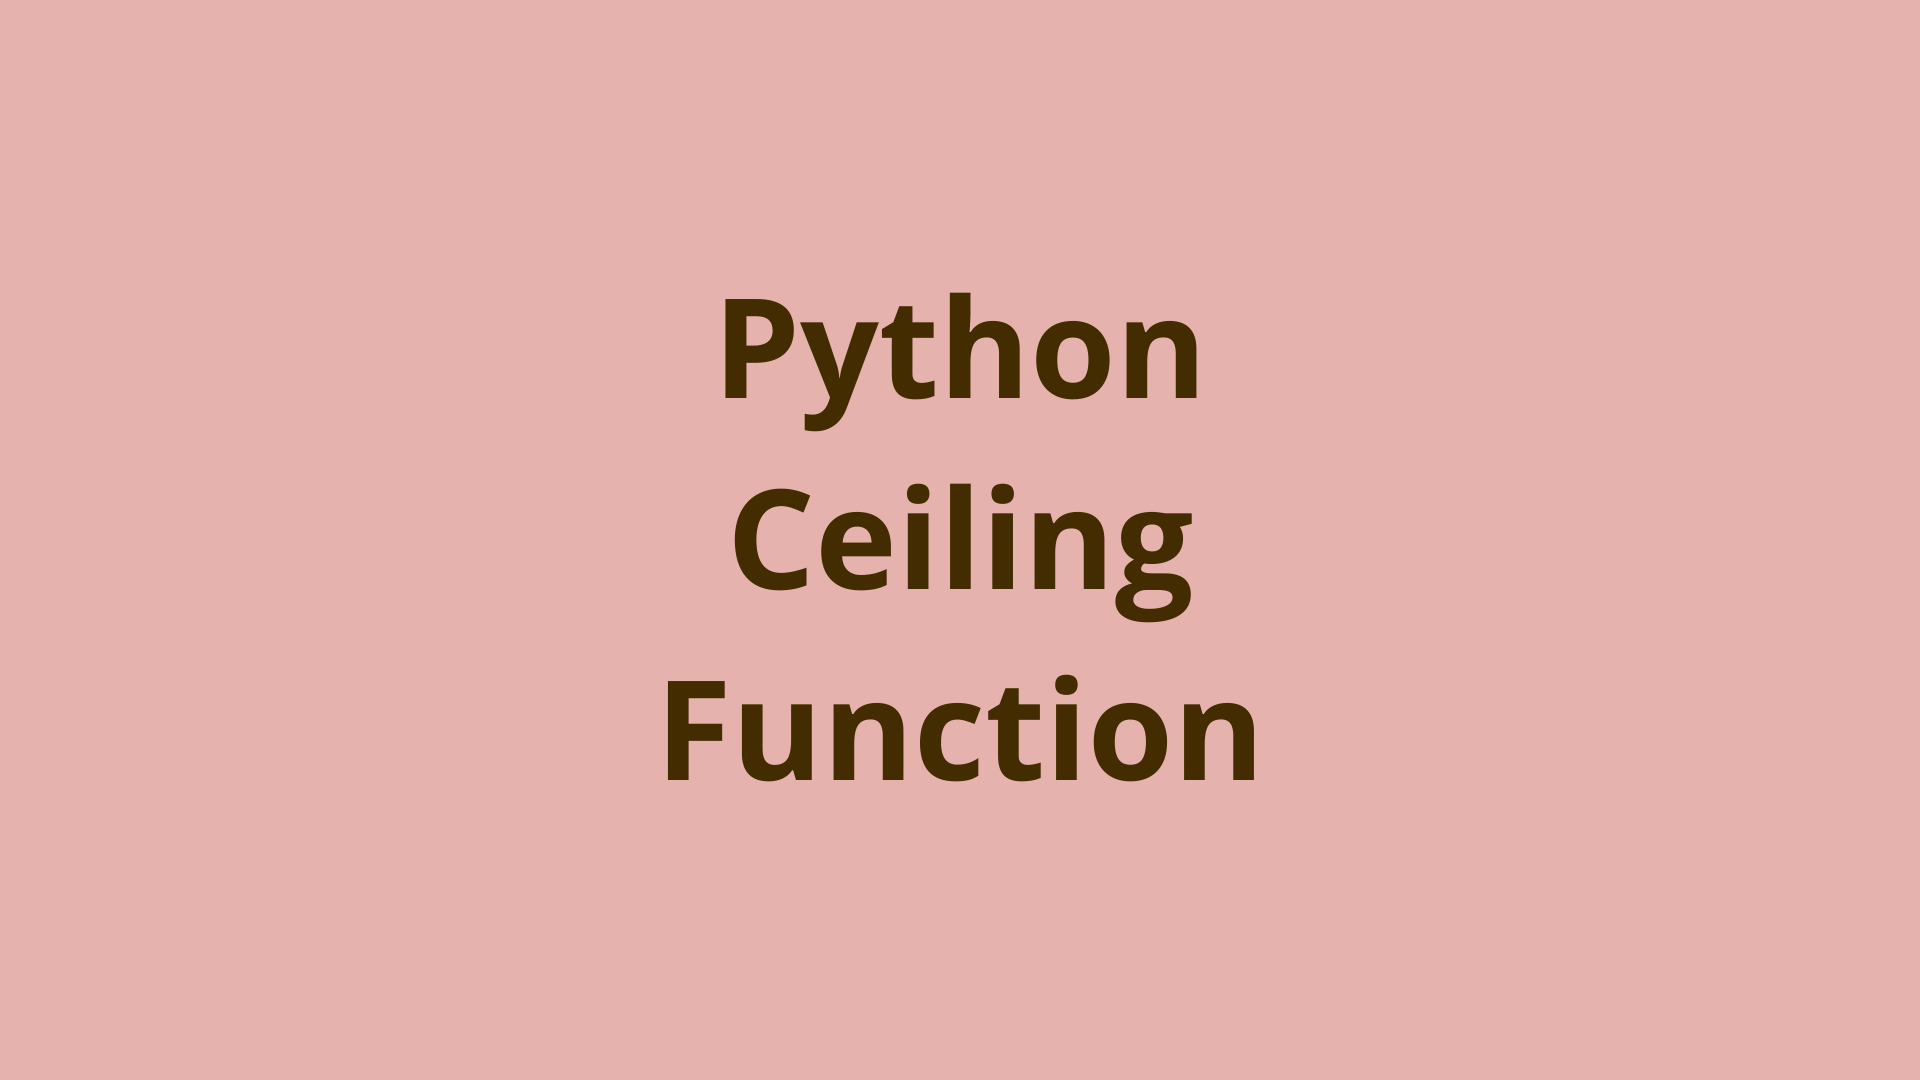 Image of Python Ceiling